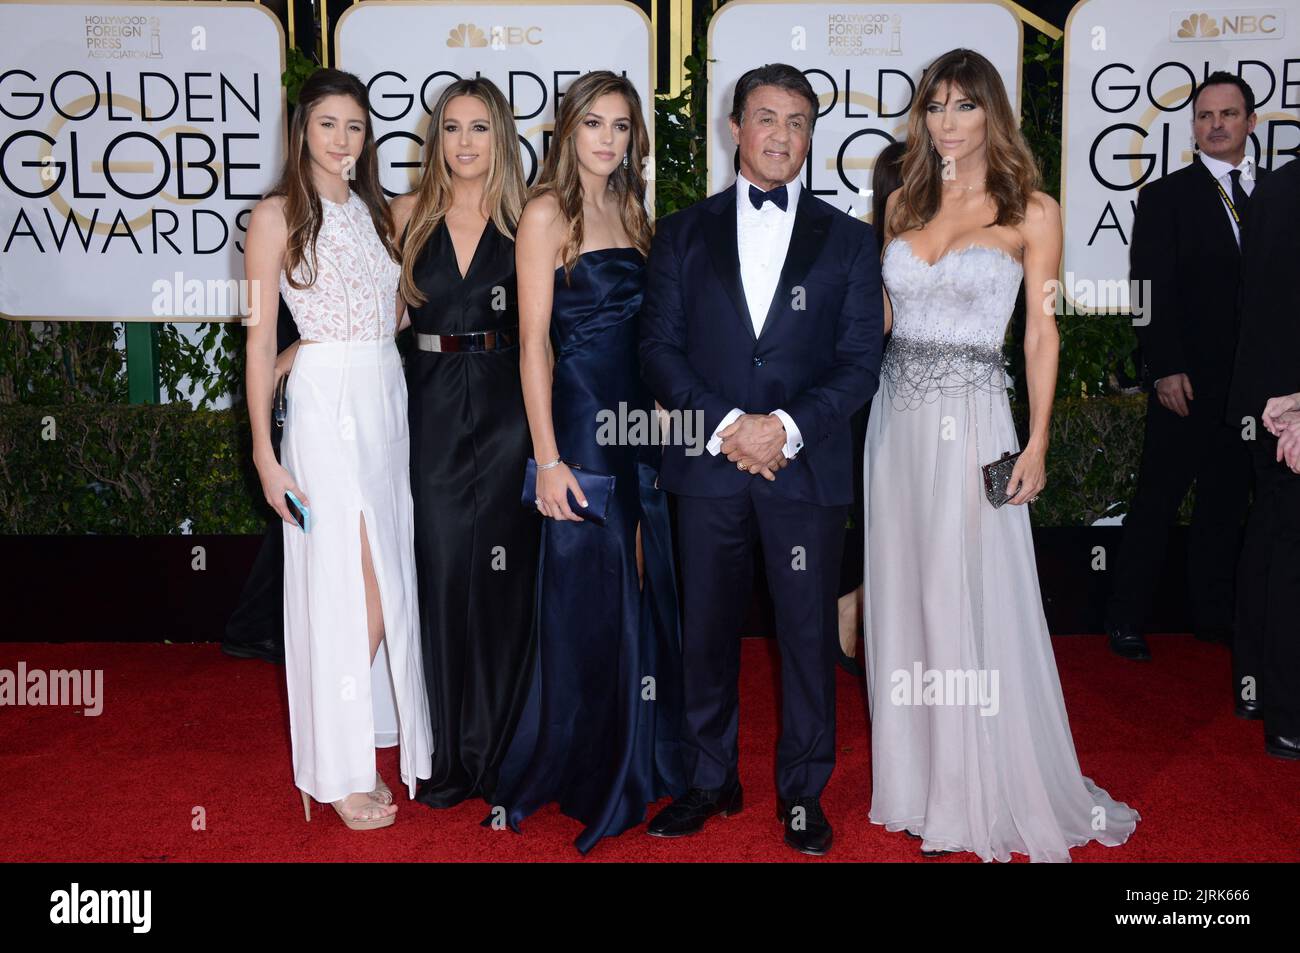 File photo dated January 10, 2016 of Sylvester Stallone, his wife Jennifer Flavin and their daughters attend the 73rd Annual Golden Globe Awards held at the Beverly Hilton Hotel in Los Angeles, CA, USA. Sylvester Stallone and Jennifer Flavin are divorcing after 25 years of marriage. Flavin filed a petition 'for dissolution of marriage and other relief' from the Rocky actor, 76, on Friday at a court in Palm Beach County, Florida. Stallone and Flavin, 54, married in 1997, though their relationship originally began in 1988 at a restaurant in Beverly Hills, California. Photo by Lionel Hahn/ABACAPR Stock Photo